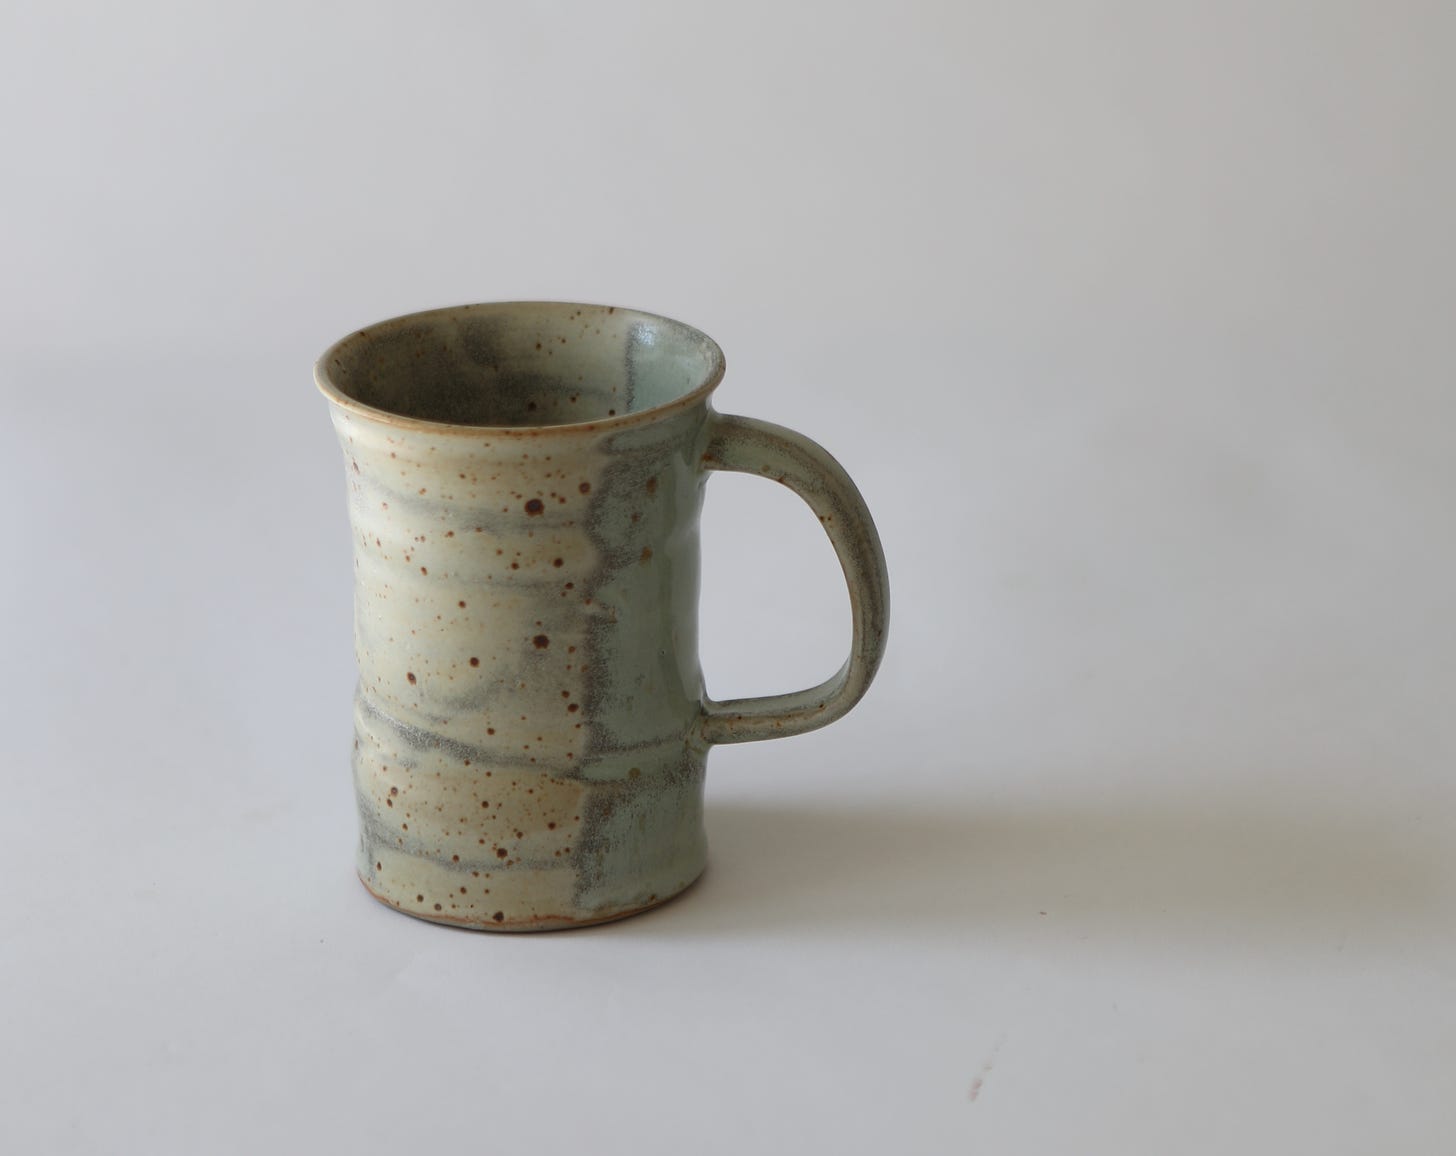 Yellow glazed mug with gray background, speckled with brown spots and some blue on one side. mug was thrown and altered. The brown spots are like the surface of a bird's egg.